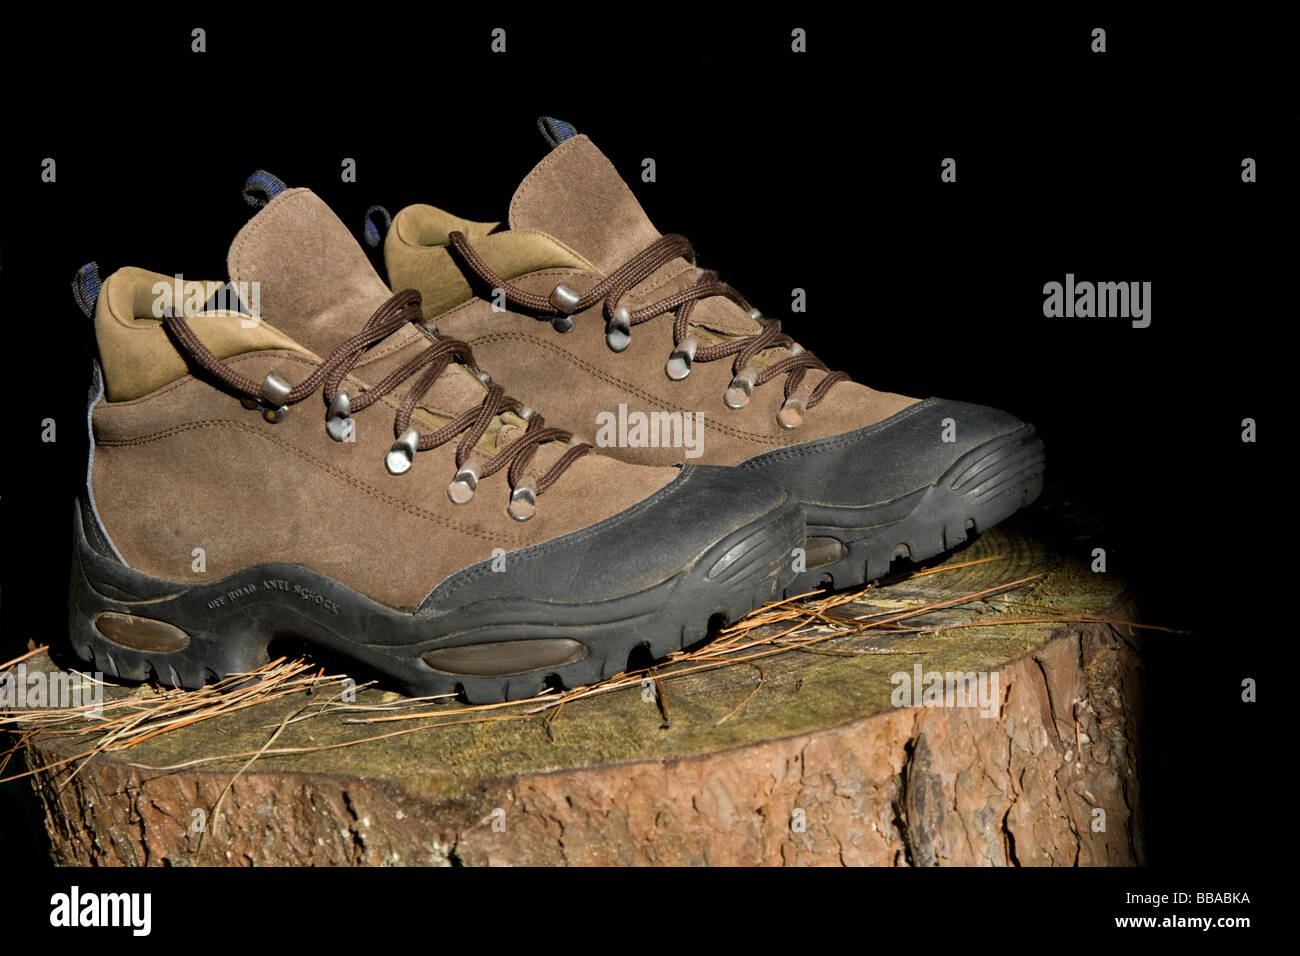 A pair of hiking boots on a cut tree stump. Stock Photo